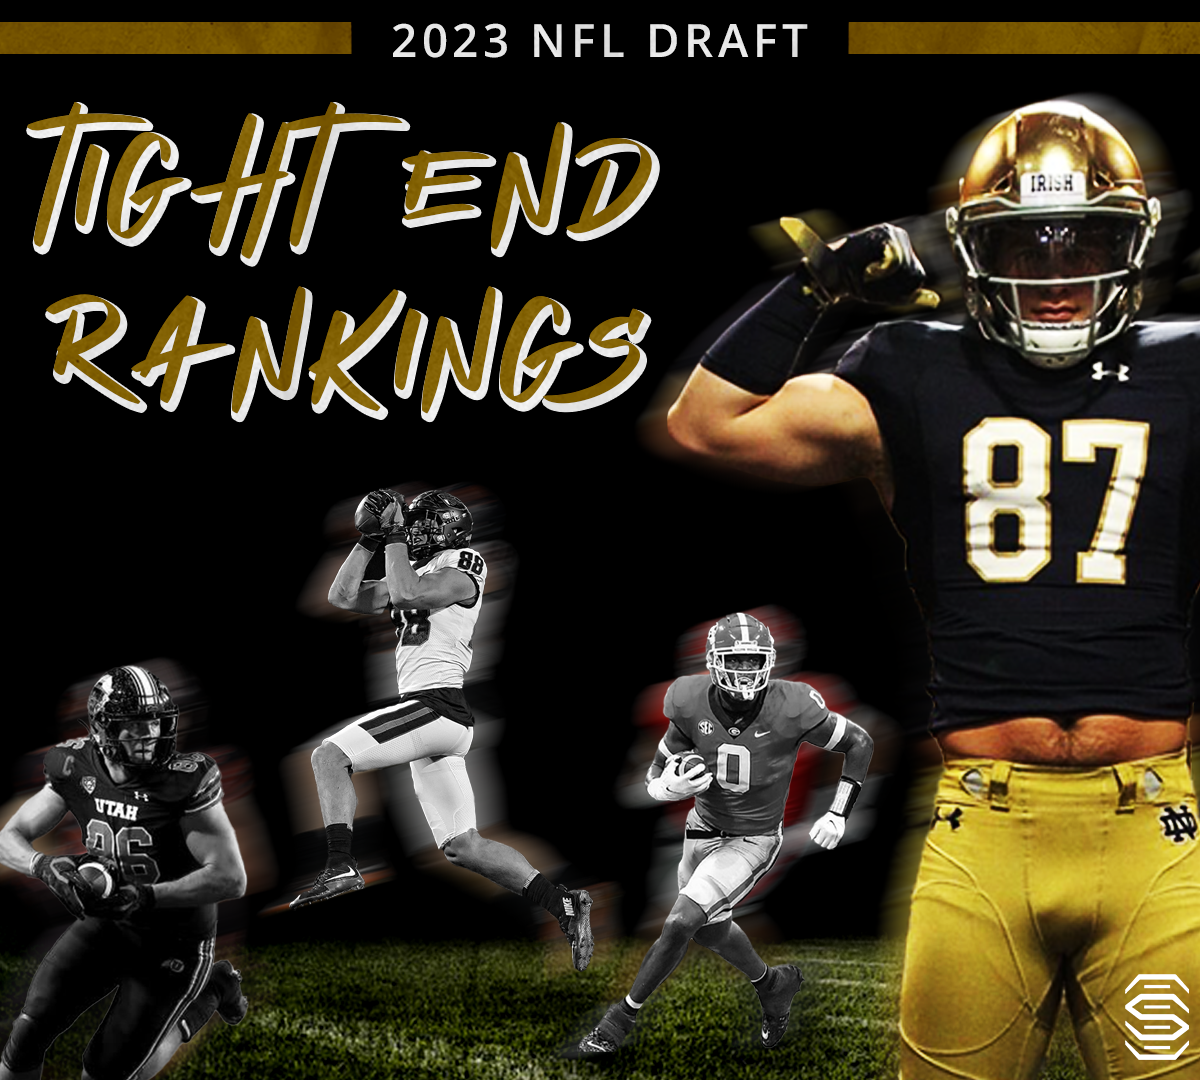 2023 NFL Draft tight end rankings Michael Mayer is No. 1 in loaded TE